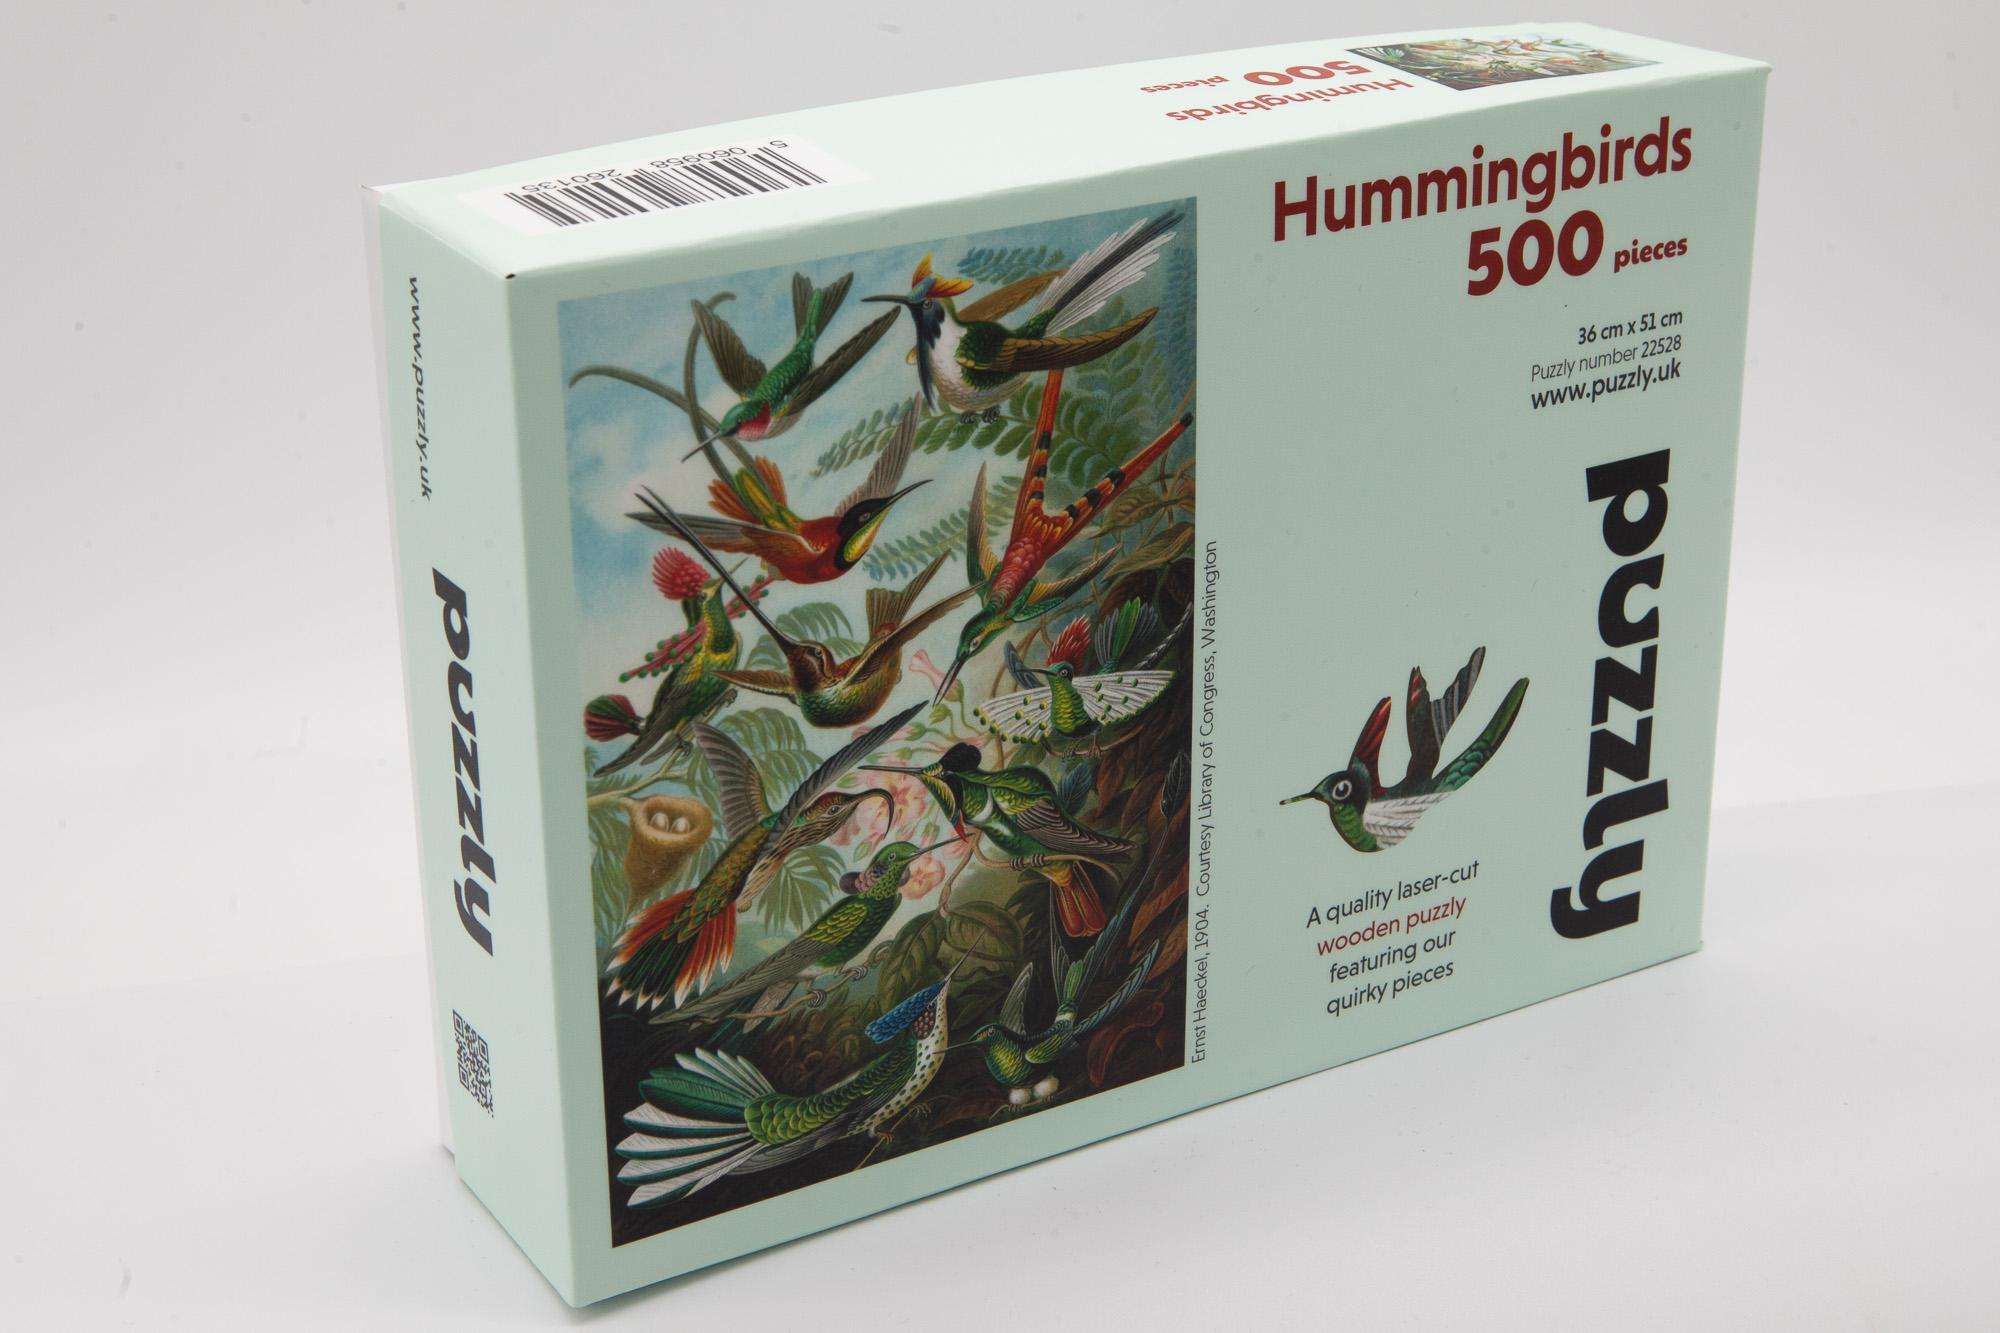 Hummingbirds, an adult wooden puzzle